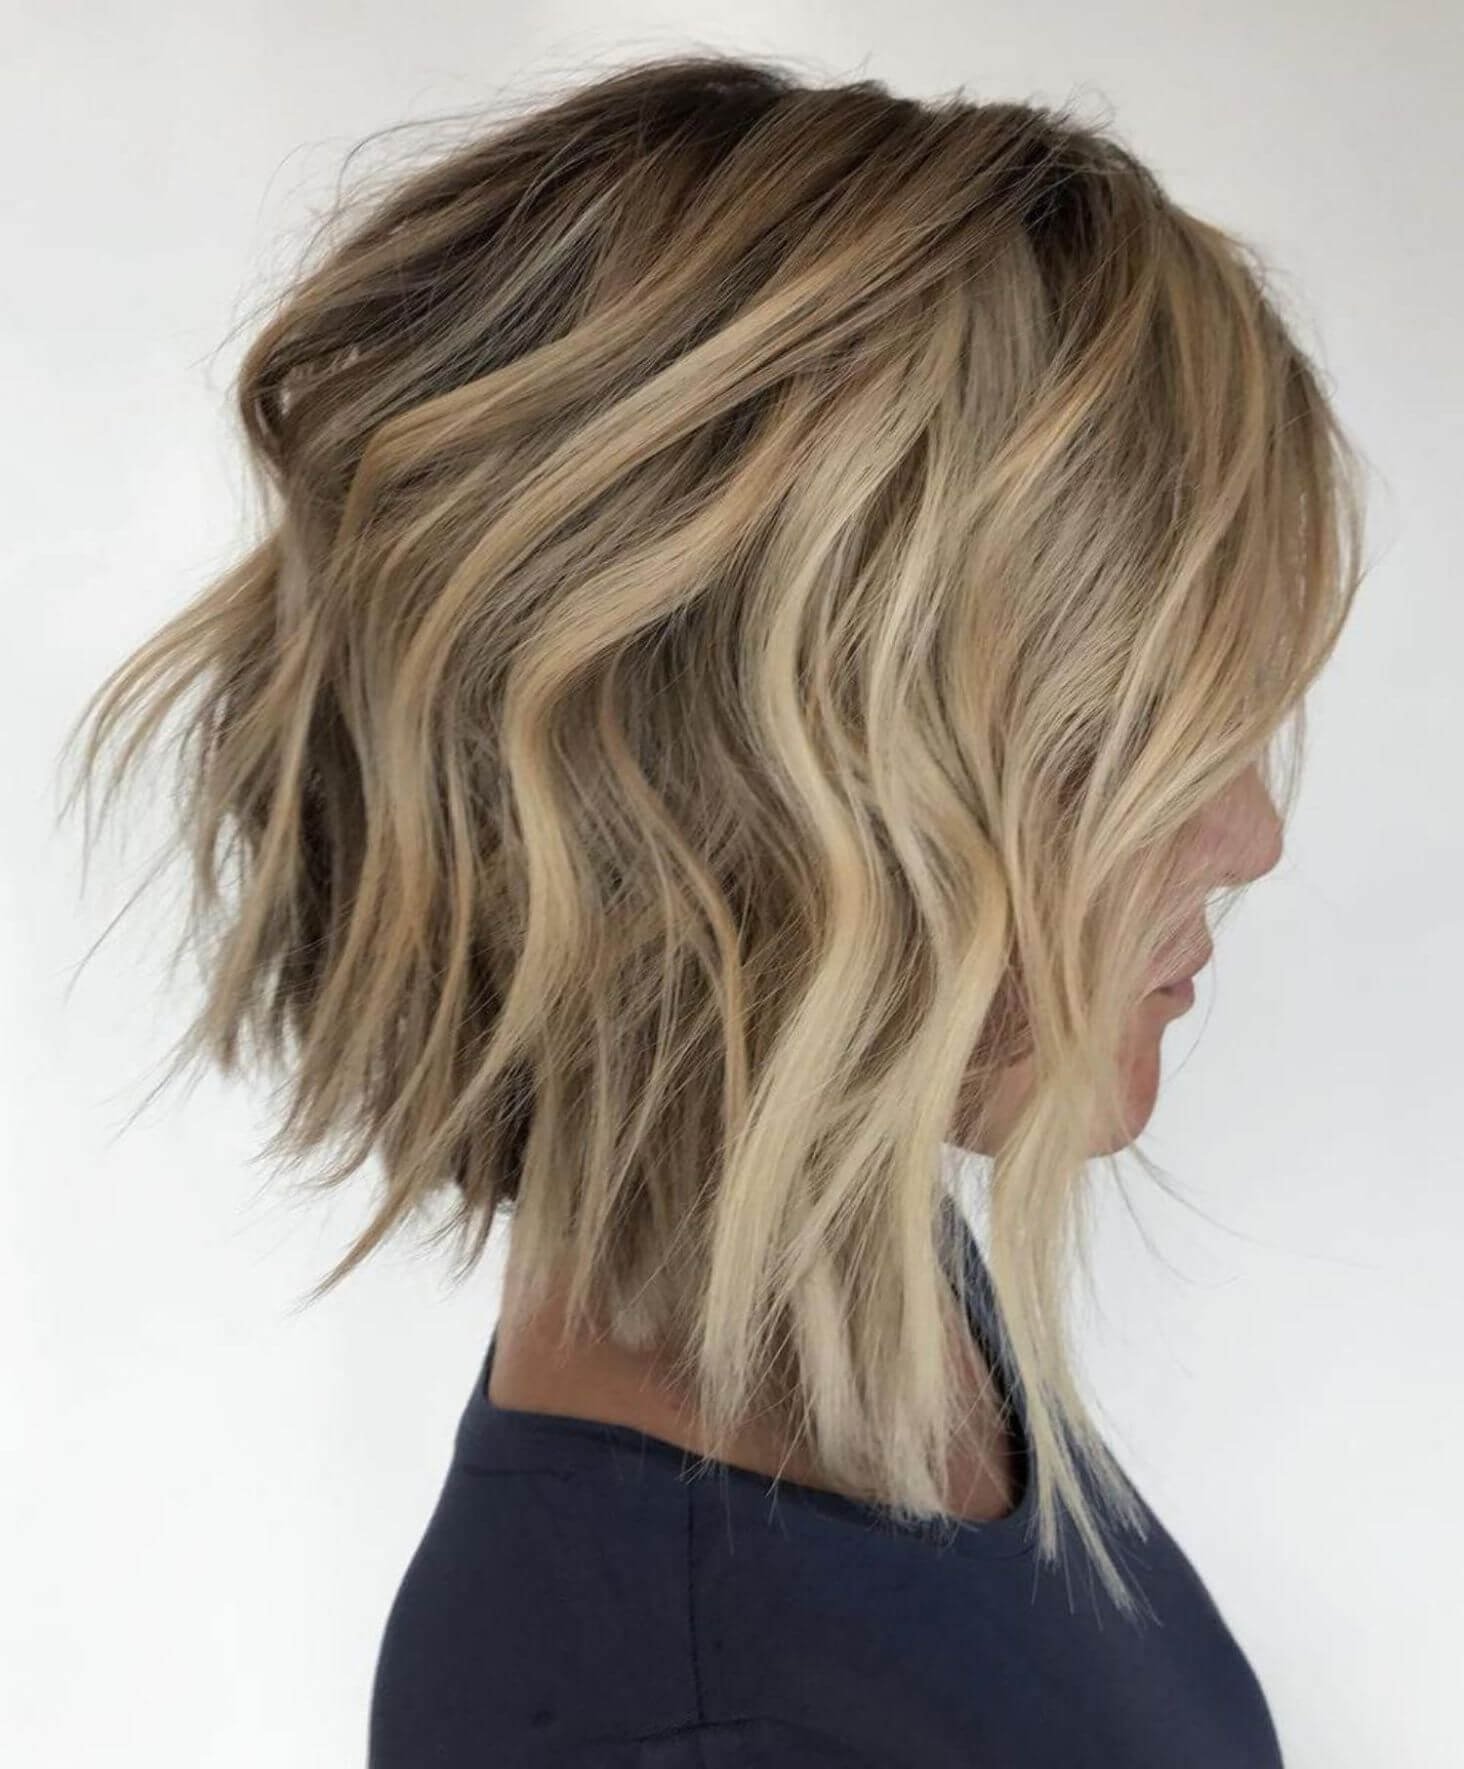 Daring choppy bob with unique elements like hair color, highlights, or shaved sides for a statement-making and unconventional look